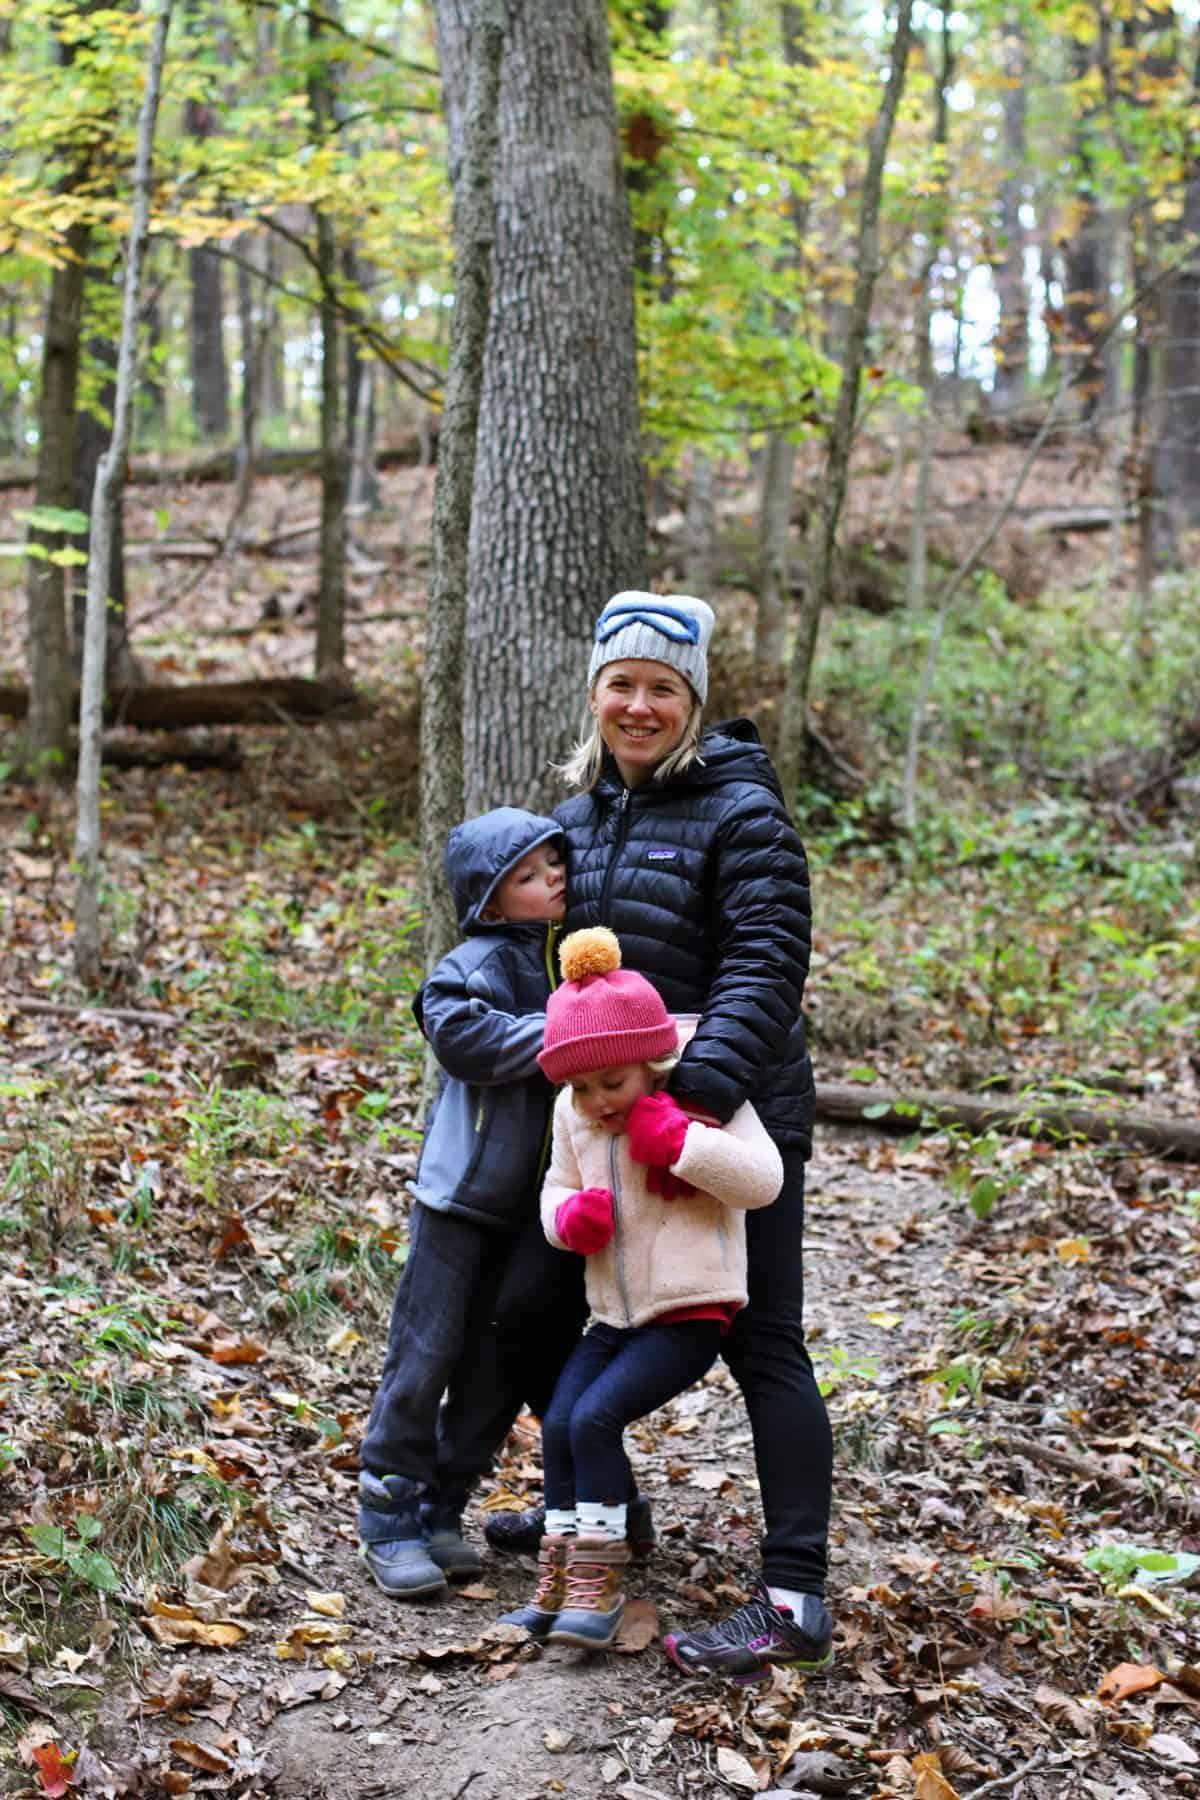 hiking with kids - dressing in layers